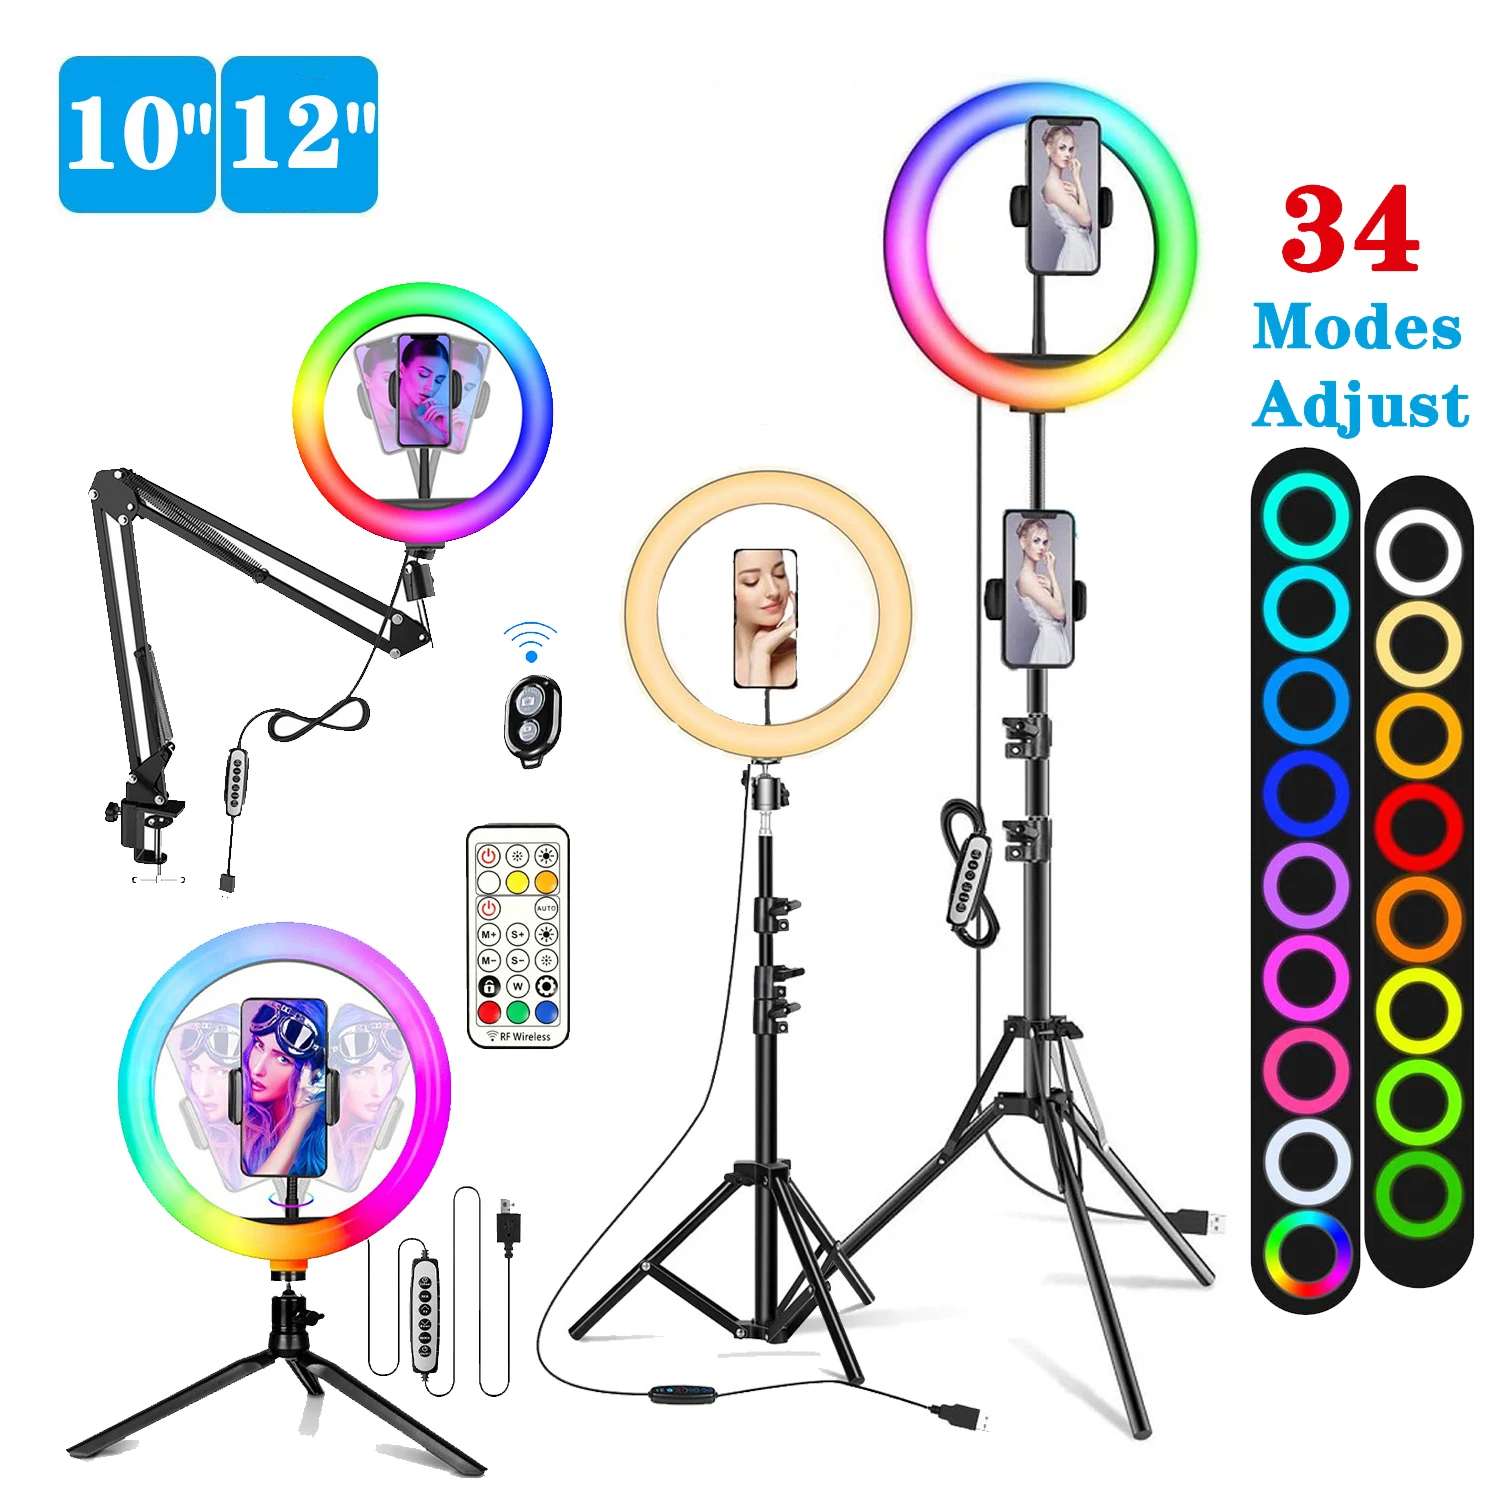 

12in 30cm Selfie RGB Ring Light Tripod Phone Stand Holder Photography RingLight Circle Fill Light Led Color Lamp Trepied Makeup